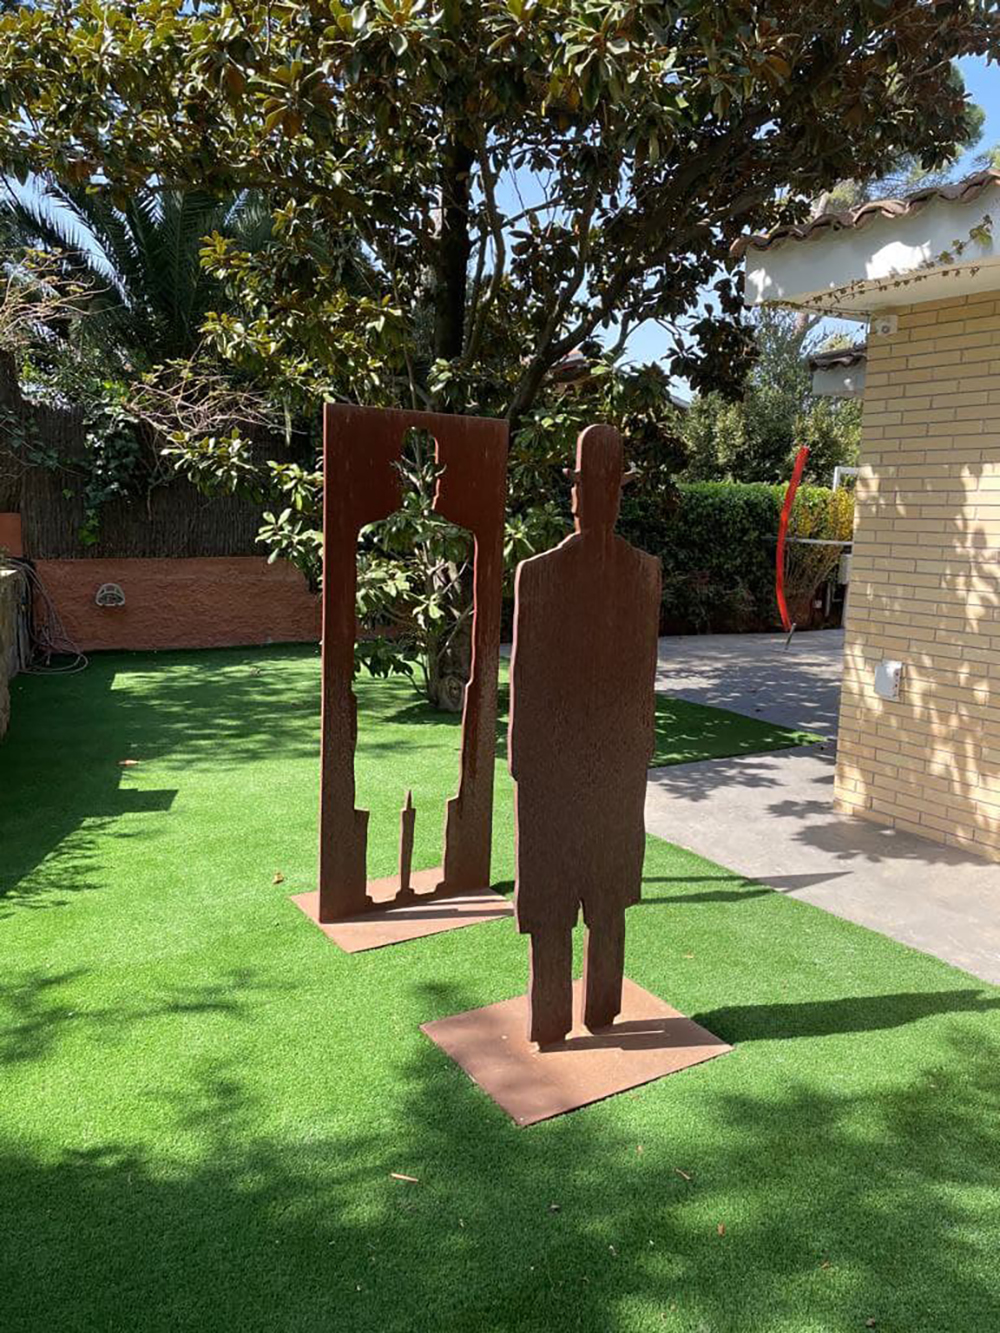 JOSÉ LUIS PASCUAL SAMARANCH (Barcelona, 1947). "Homage to Magritte". 2005. Corten steel. Size: 240 x - Image 11 of 11